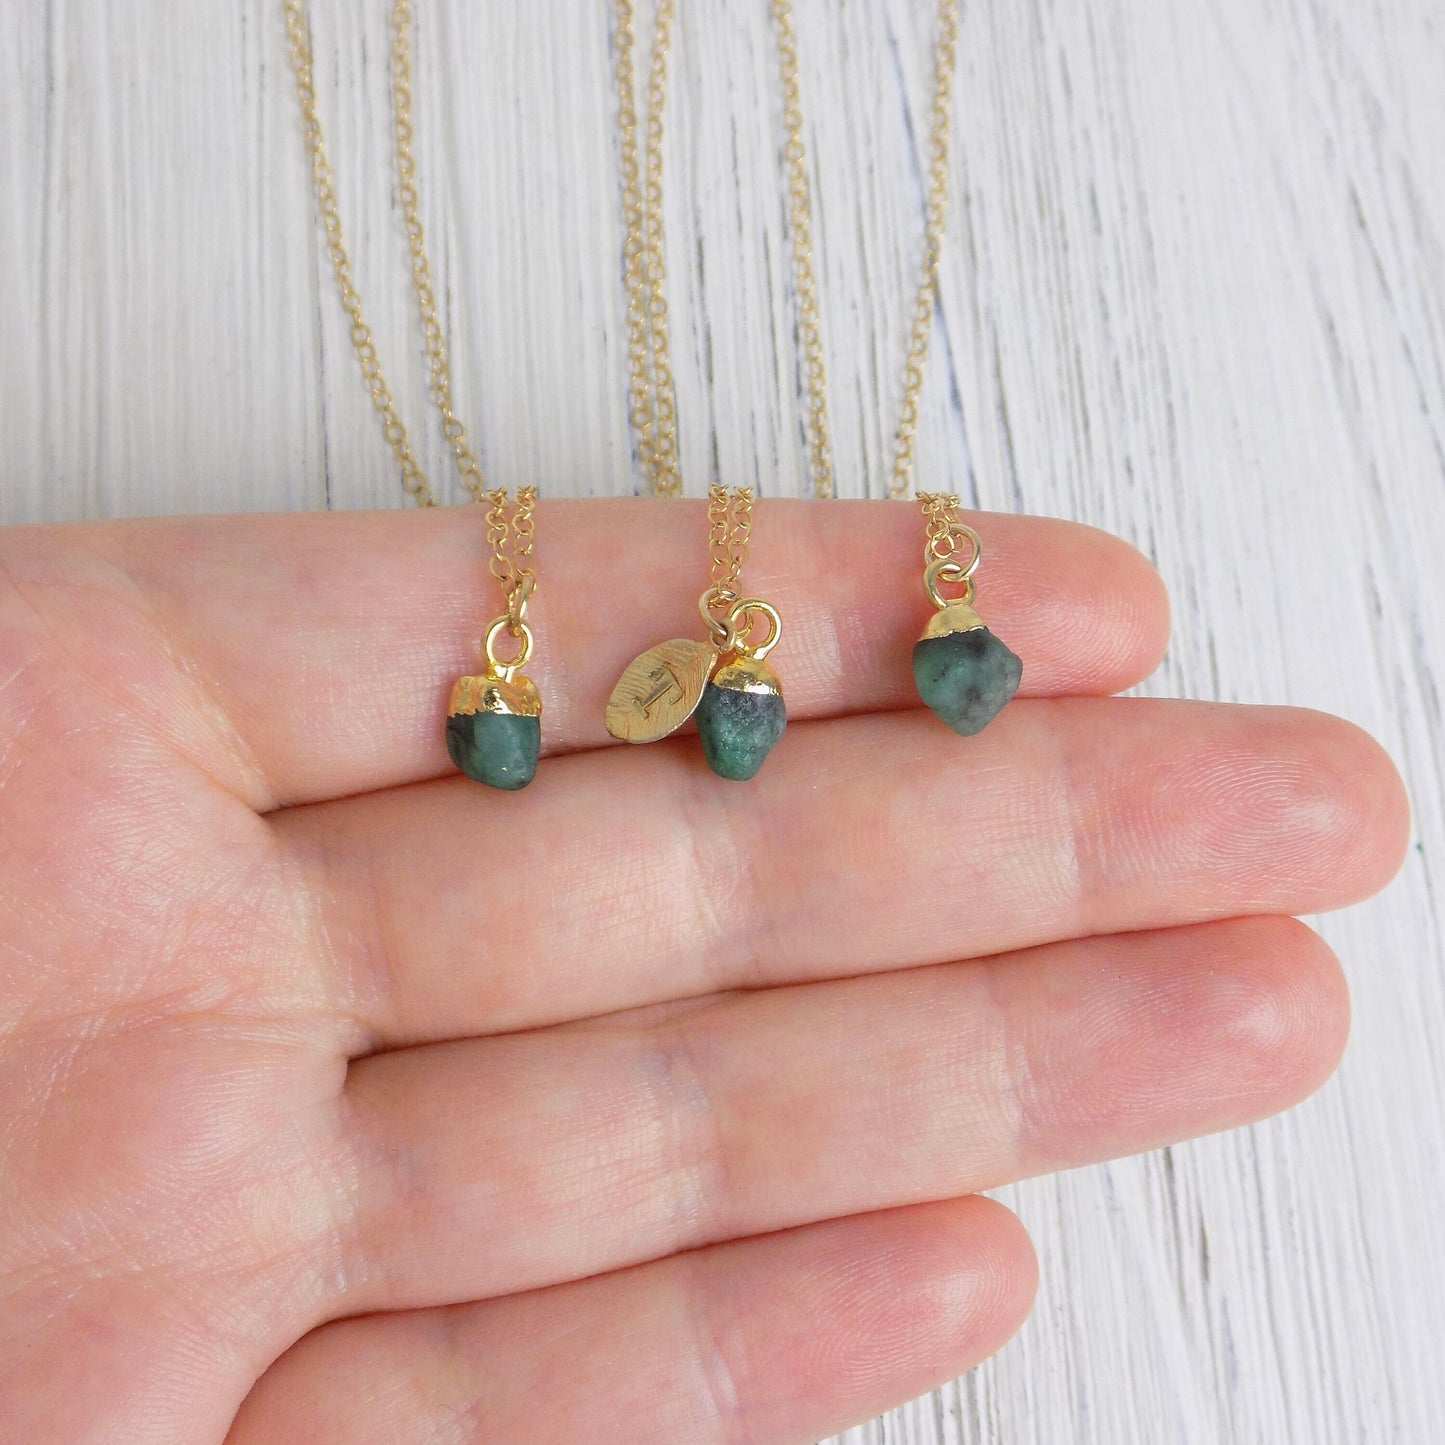 Tiny Green Emerald Gemstone Necklace Gold Personalized, Gift For Mom, M6-49